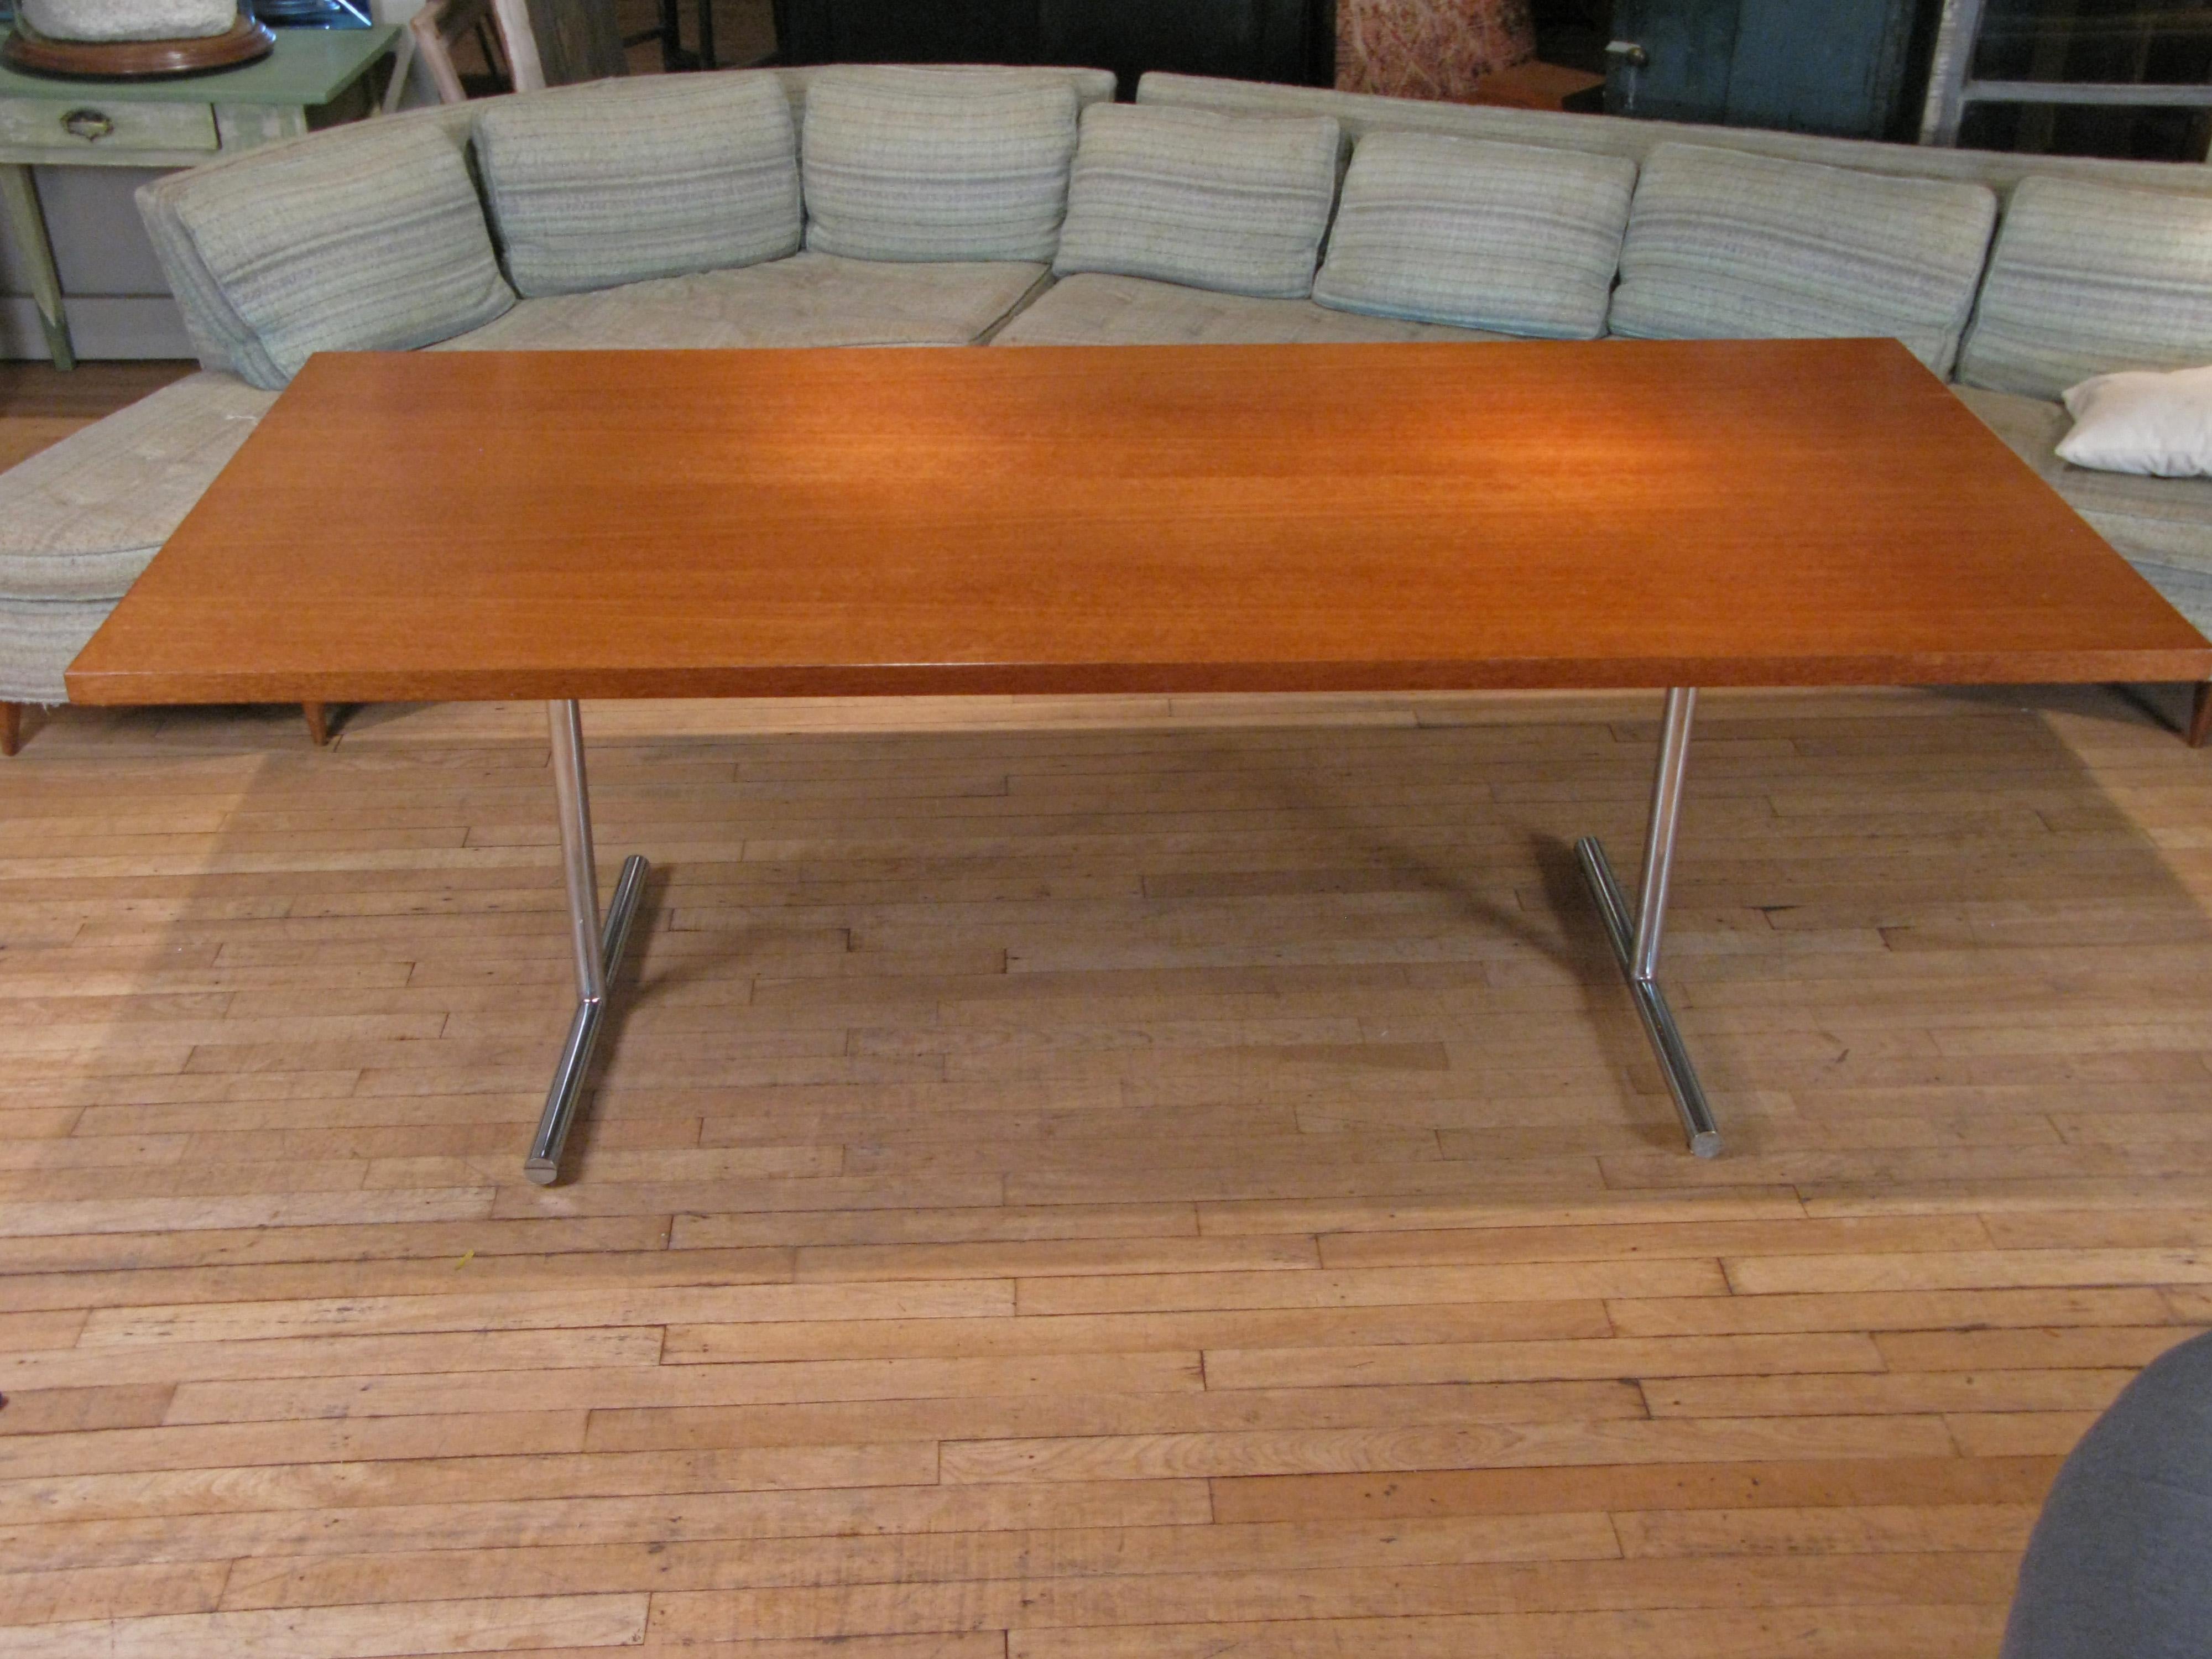 A beautiful and handsome 1950s 'Omega' dining table or desk designed by Hans Eichenberger and made by Hausmann & Hausmann in Switzerland. A modern spare design, with a large walnut top supported by a thick chromed steel base.

Works equally well